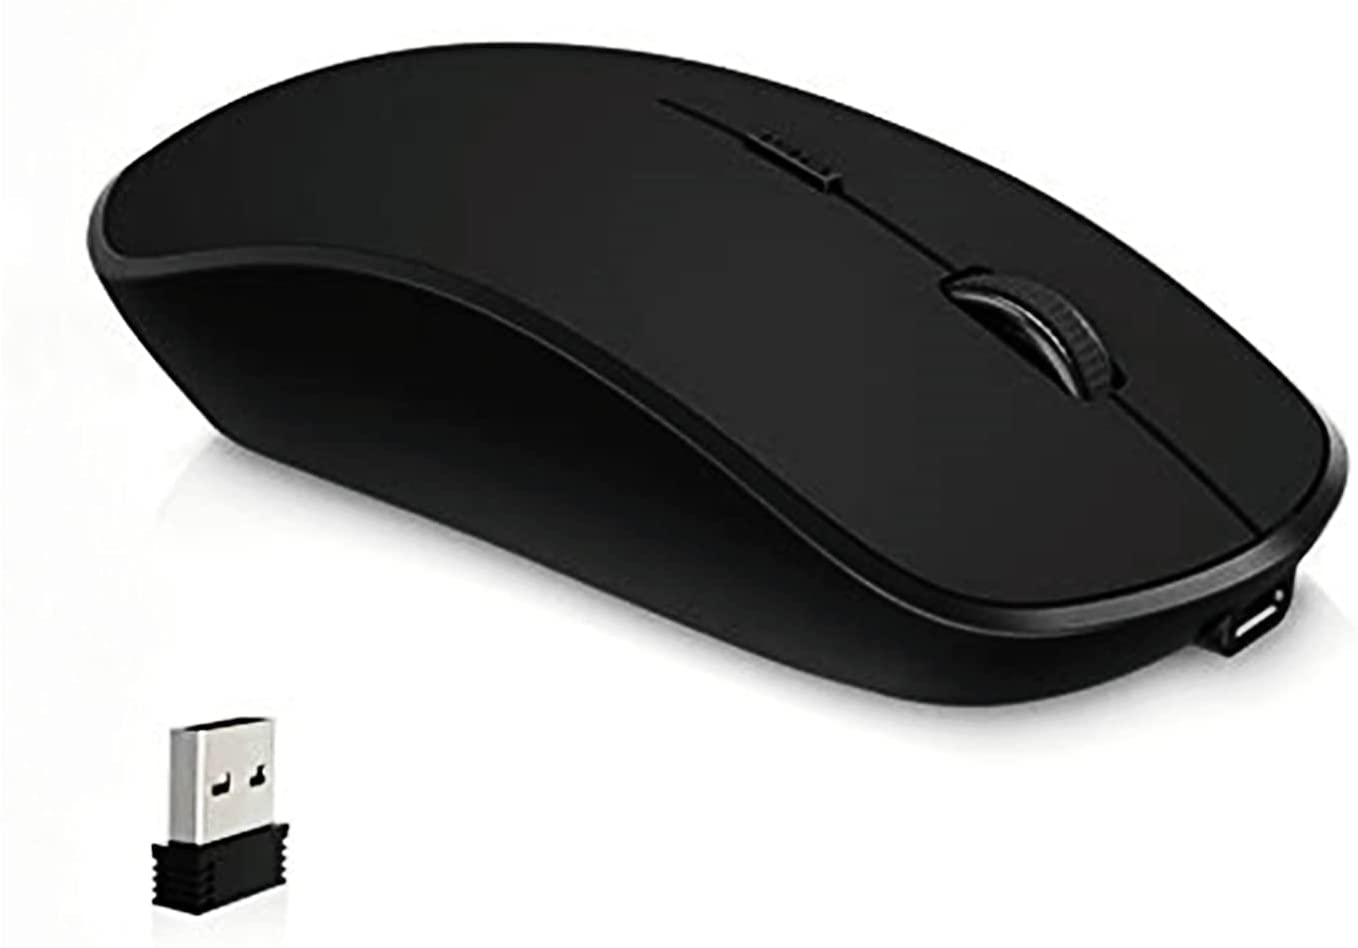 Rechargeable Wireless Mouse for Laptop, J JOYACCESS Silent Portable Cordless Mouse for Laptop with USB Nano Receiver and High Precision 2400 DPI-Black
